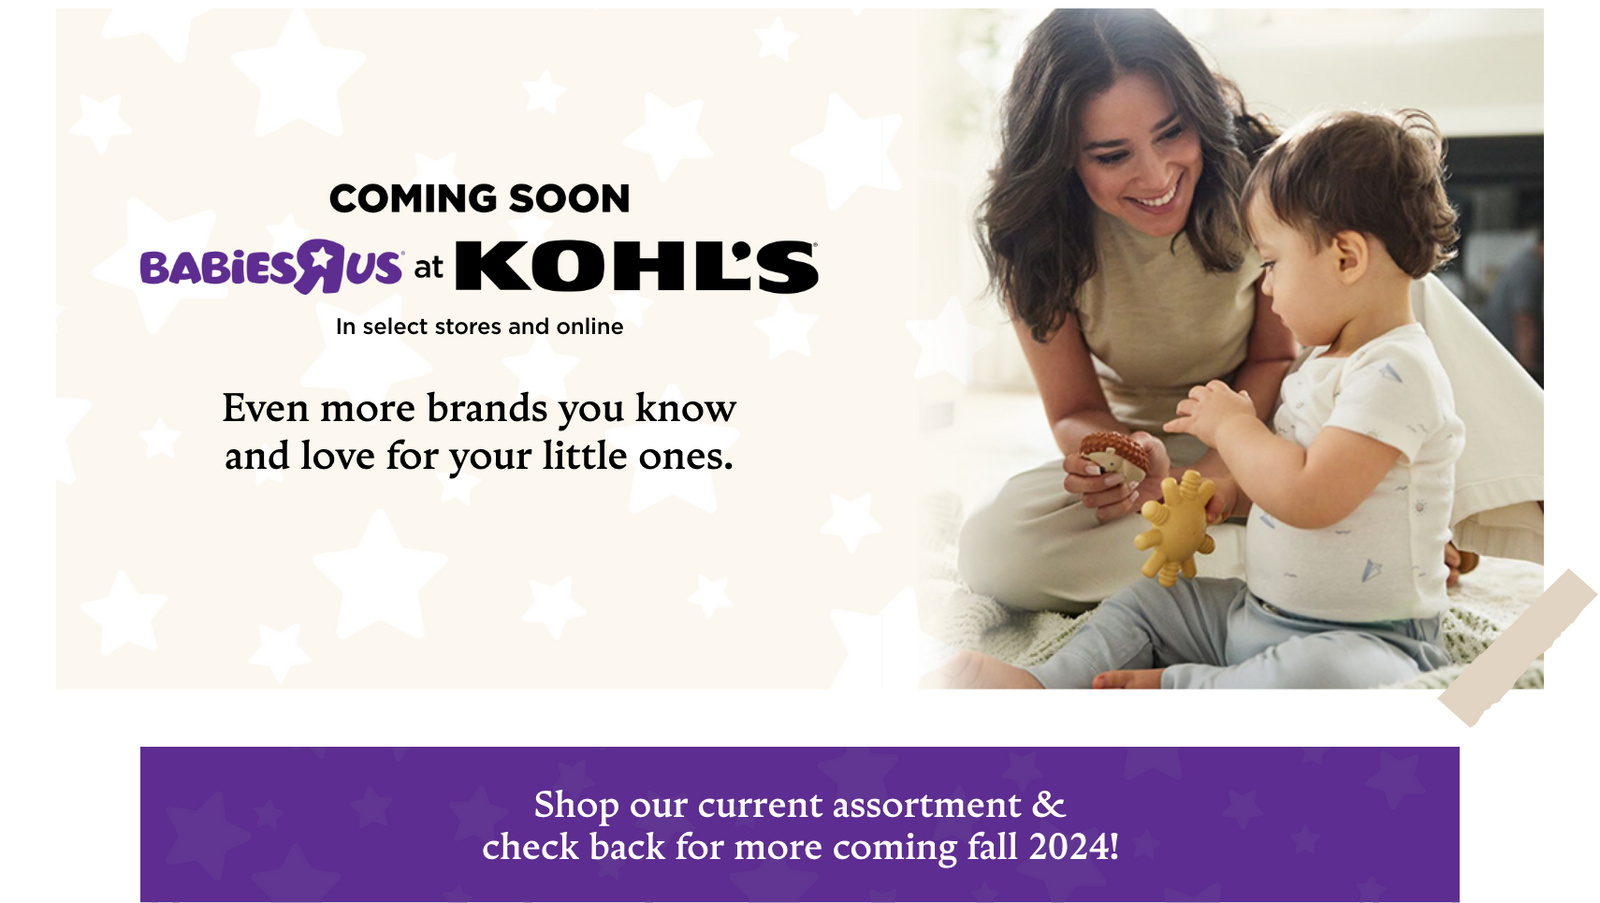 coming soon babies r us at kohls in select stores and online. shop our current assortment and check back for more coming fall 2024